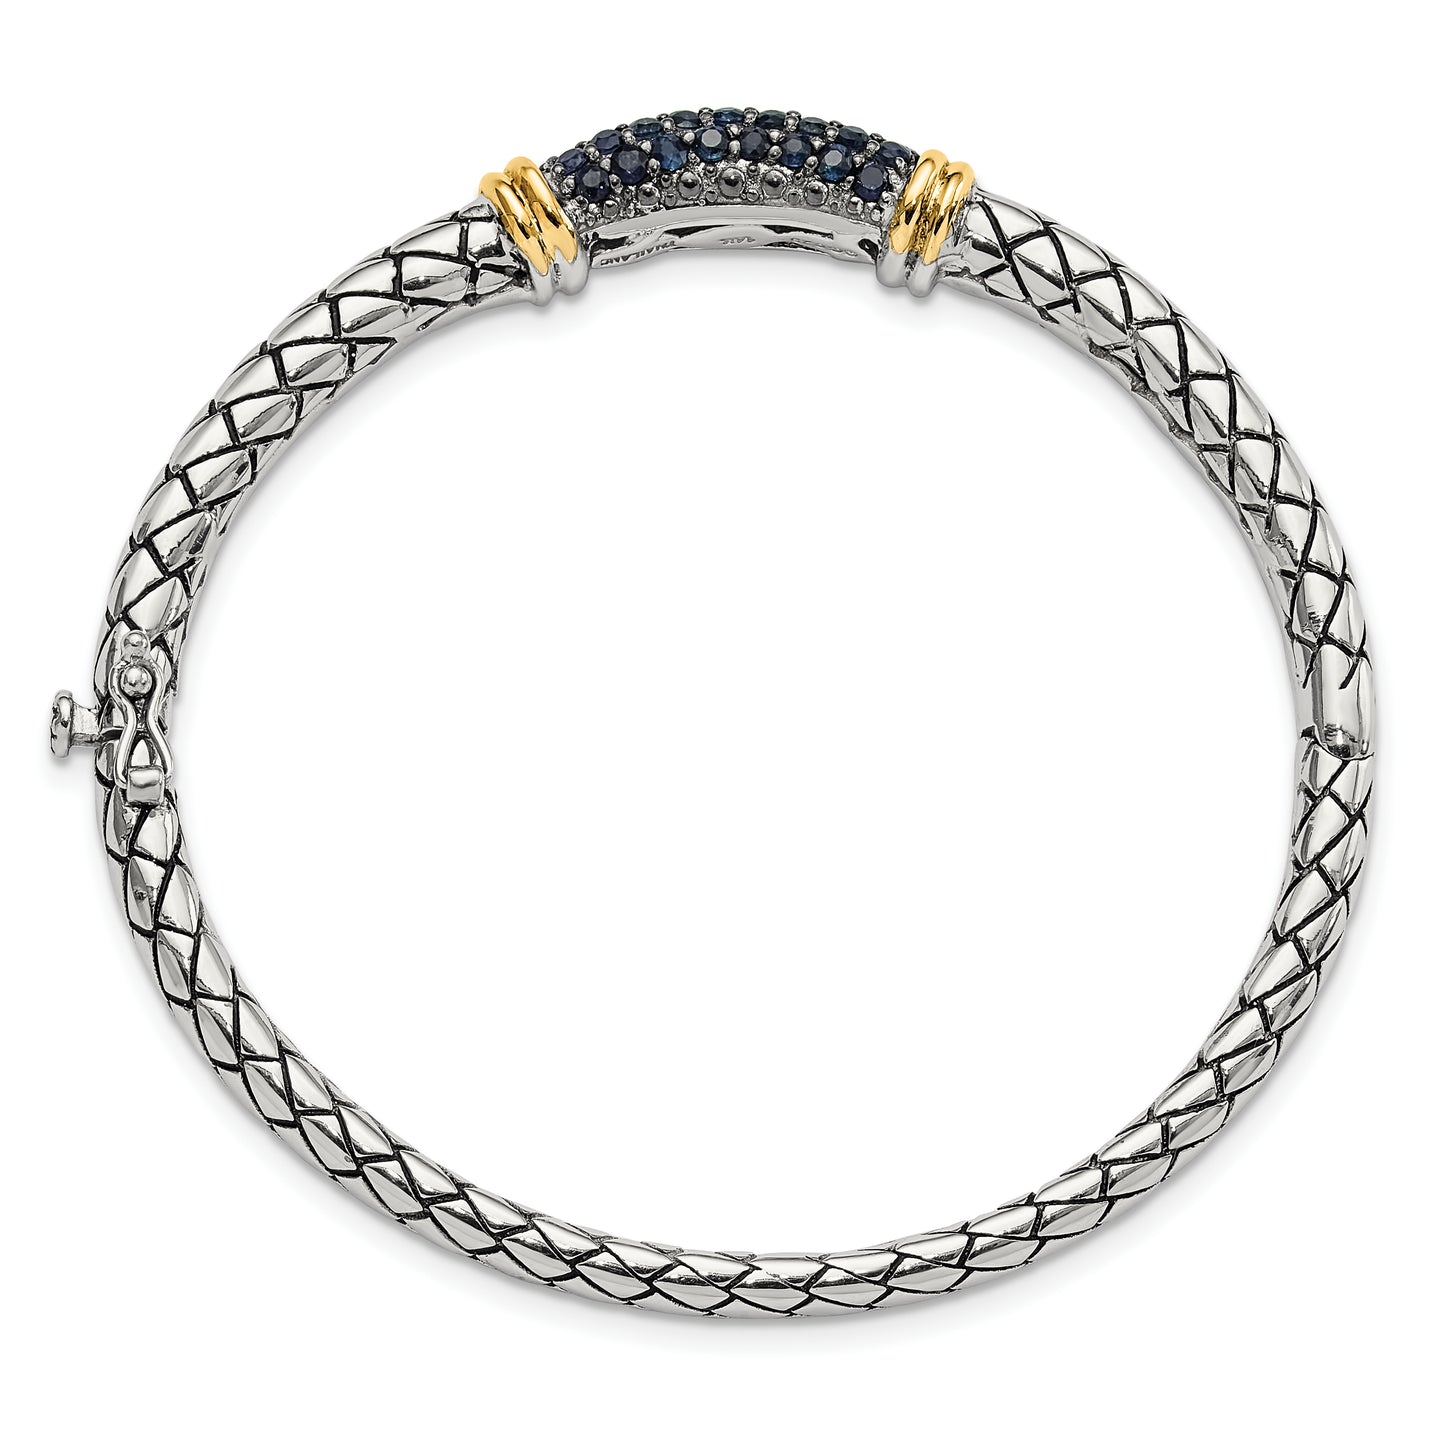 Sterling Silver Rhodium-plated with 14k Accent Sapphire Bangle Bracelet